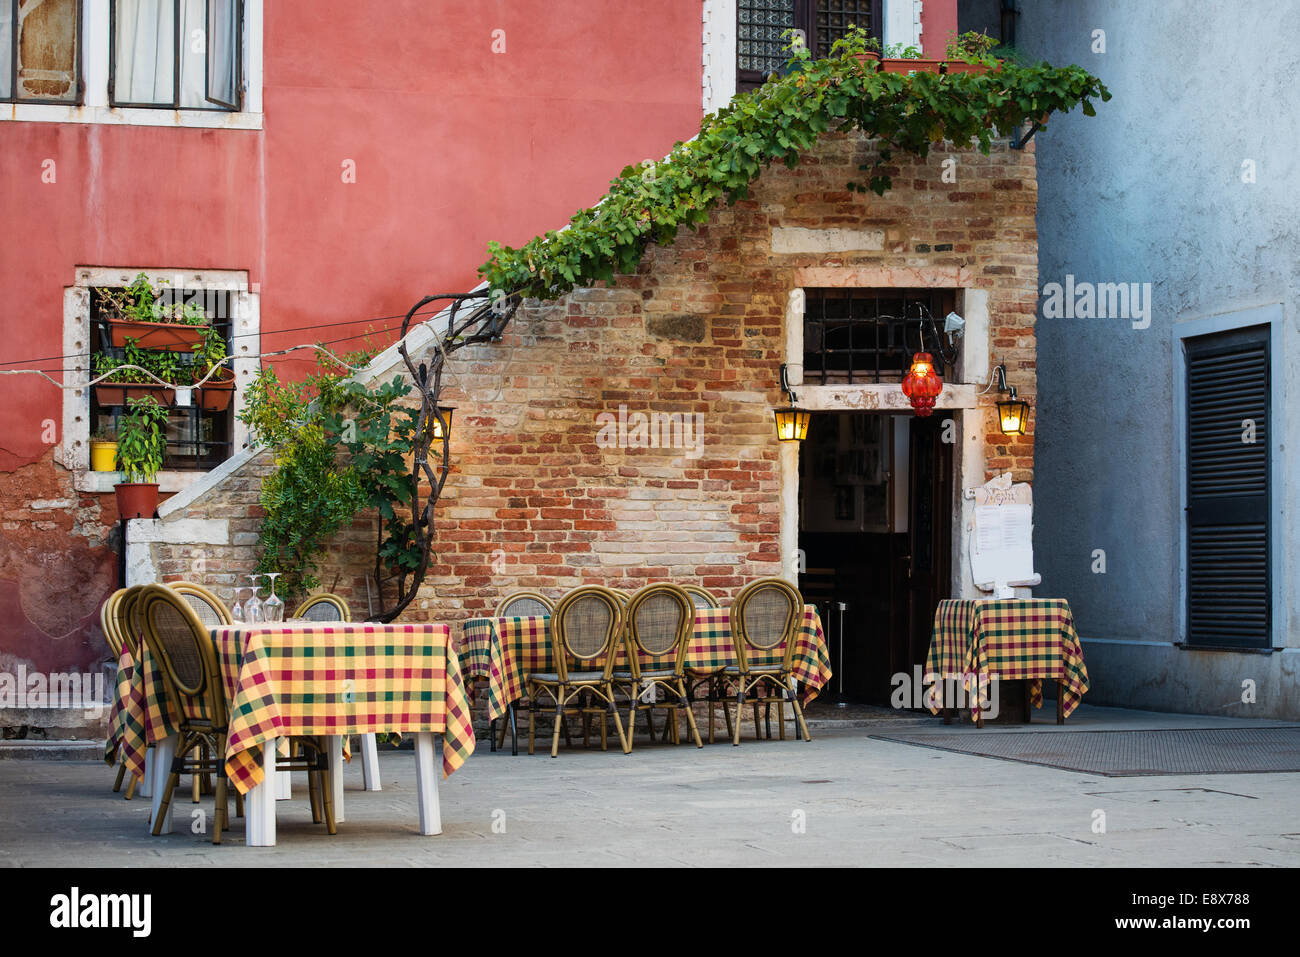 Typical small Italian  cafe  outdoor  Stock Photo 74335192 